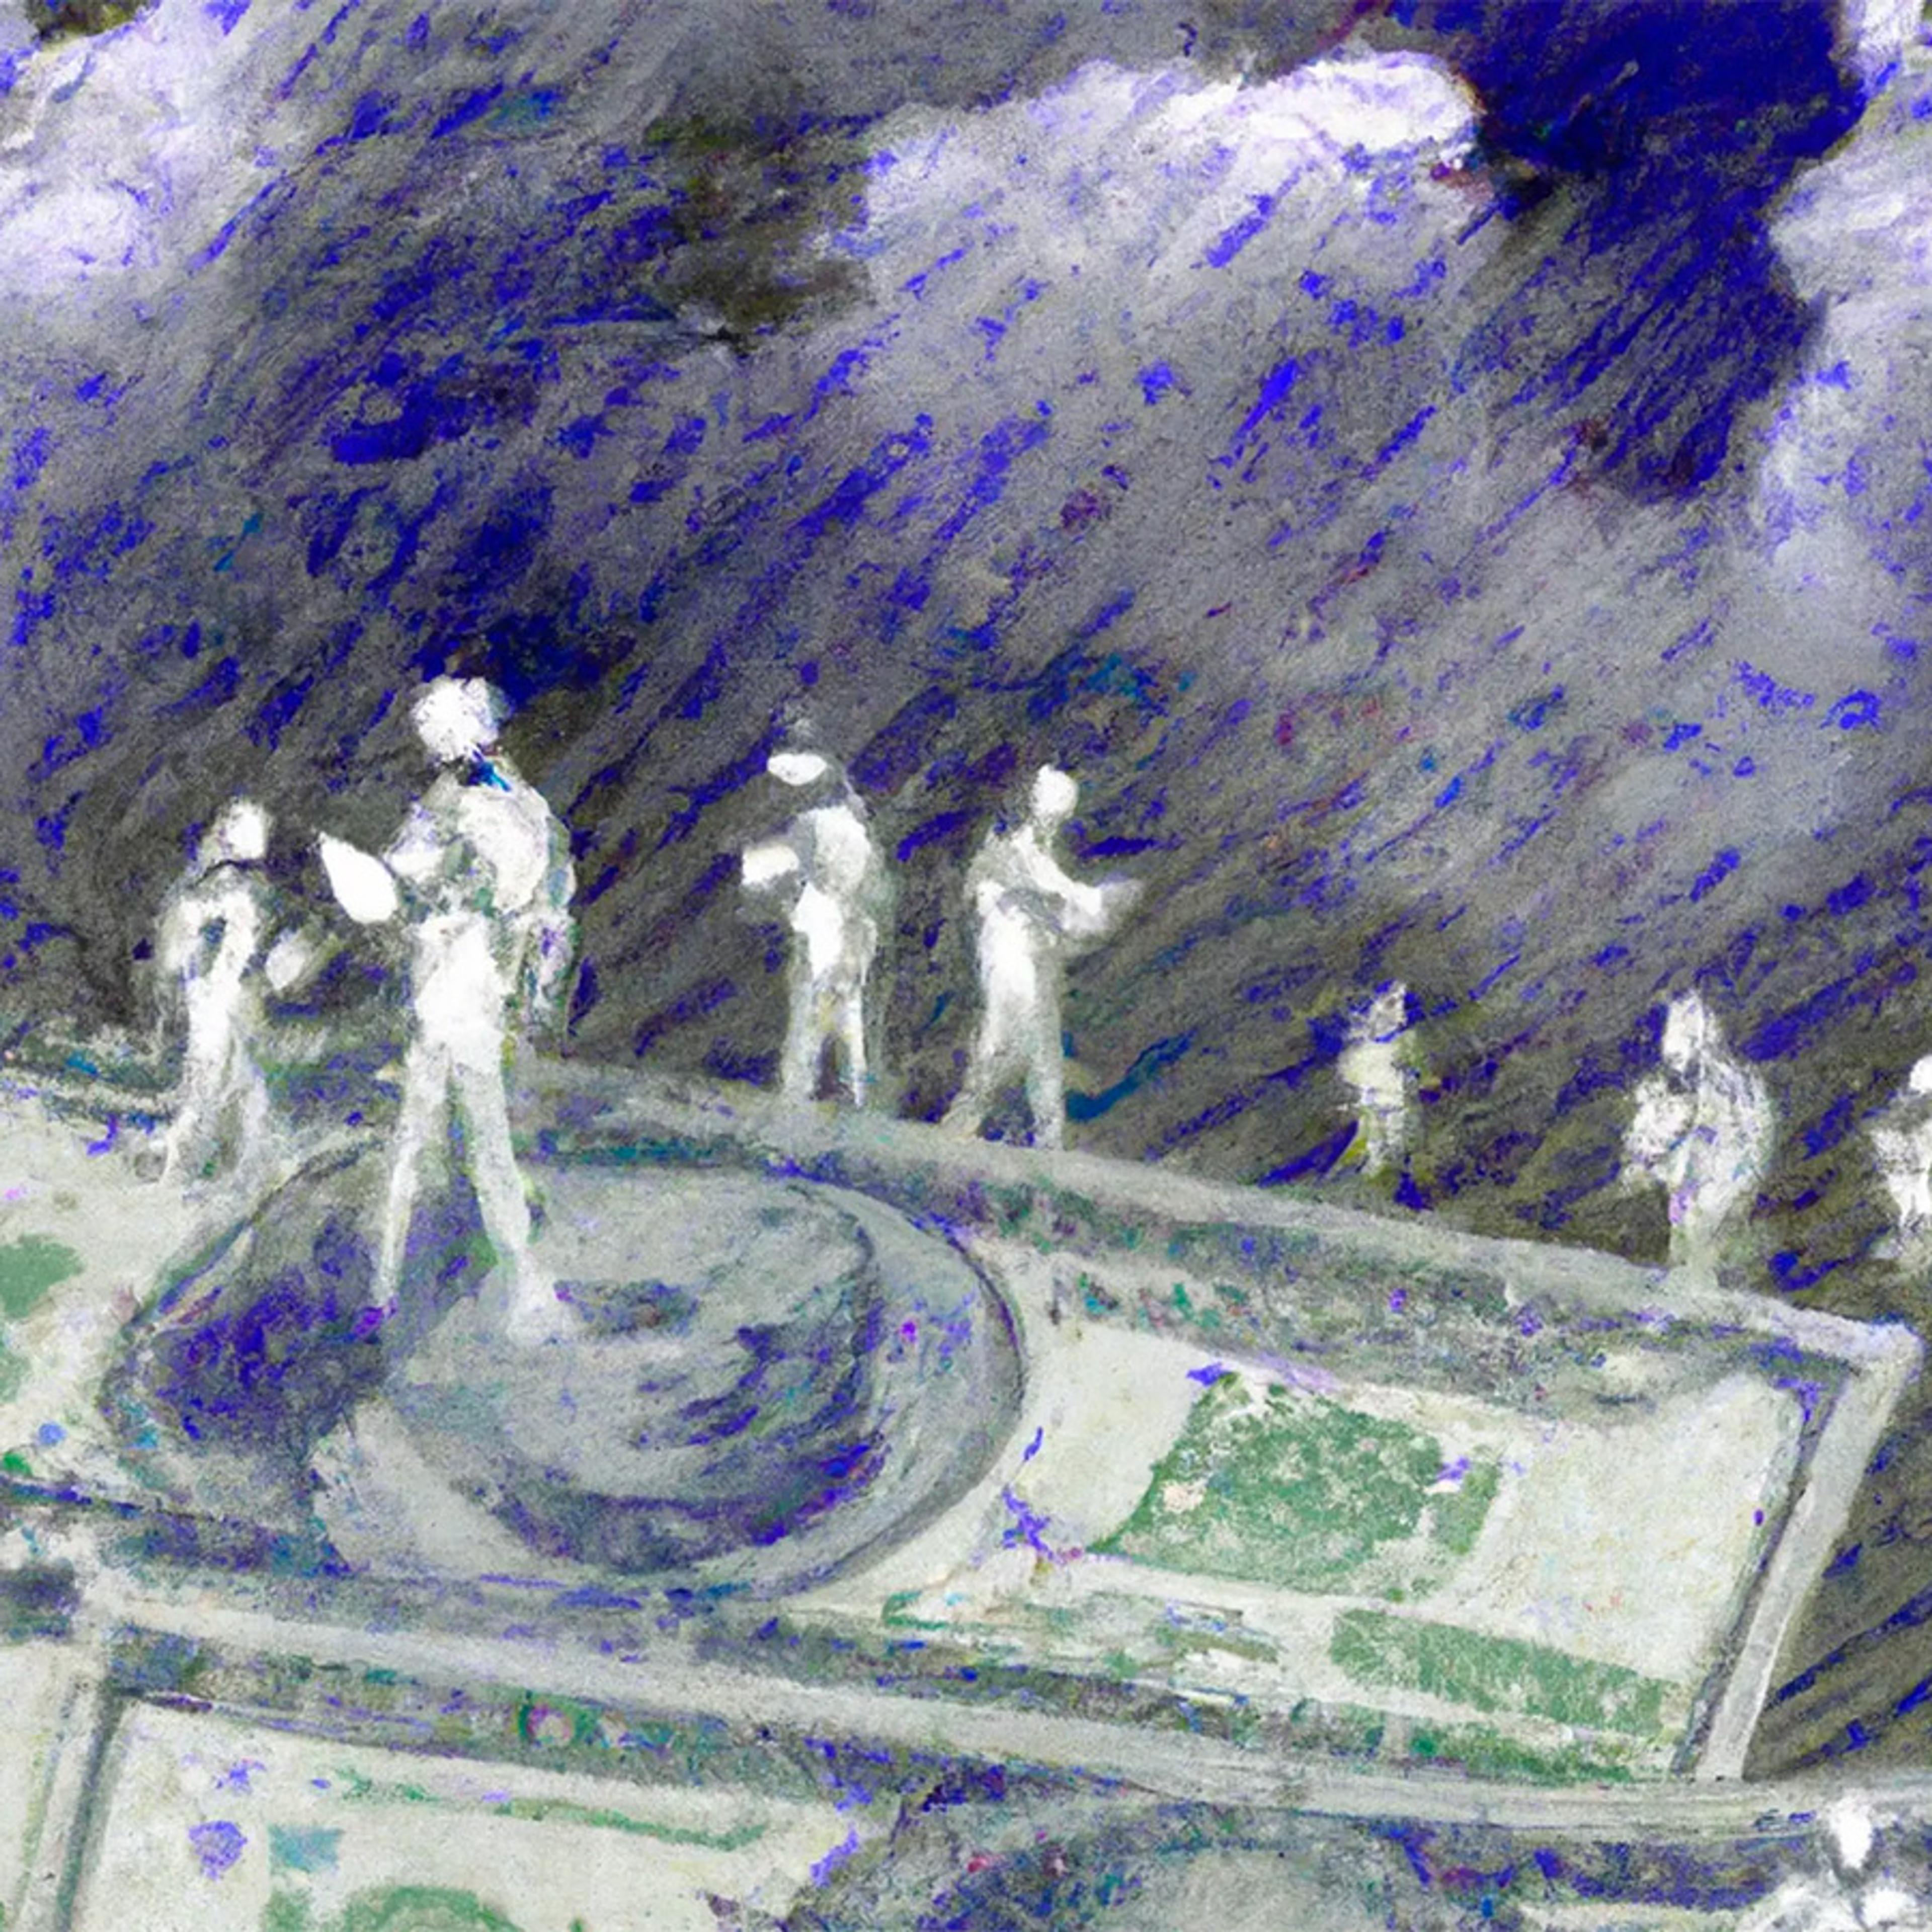 Oncoming storm clouds containing hundred dollar bills and human figures holding internet-connected devices,, abstract art